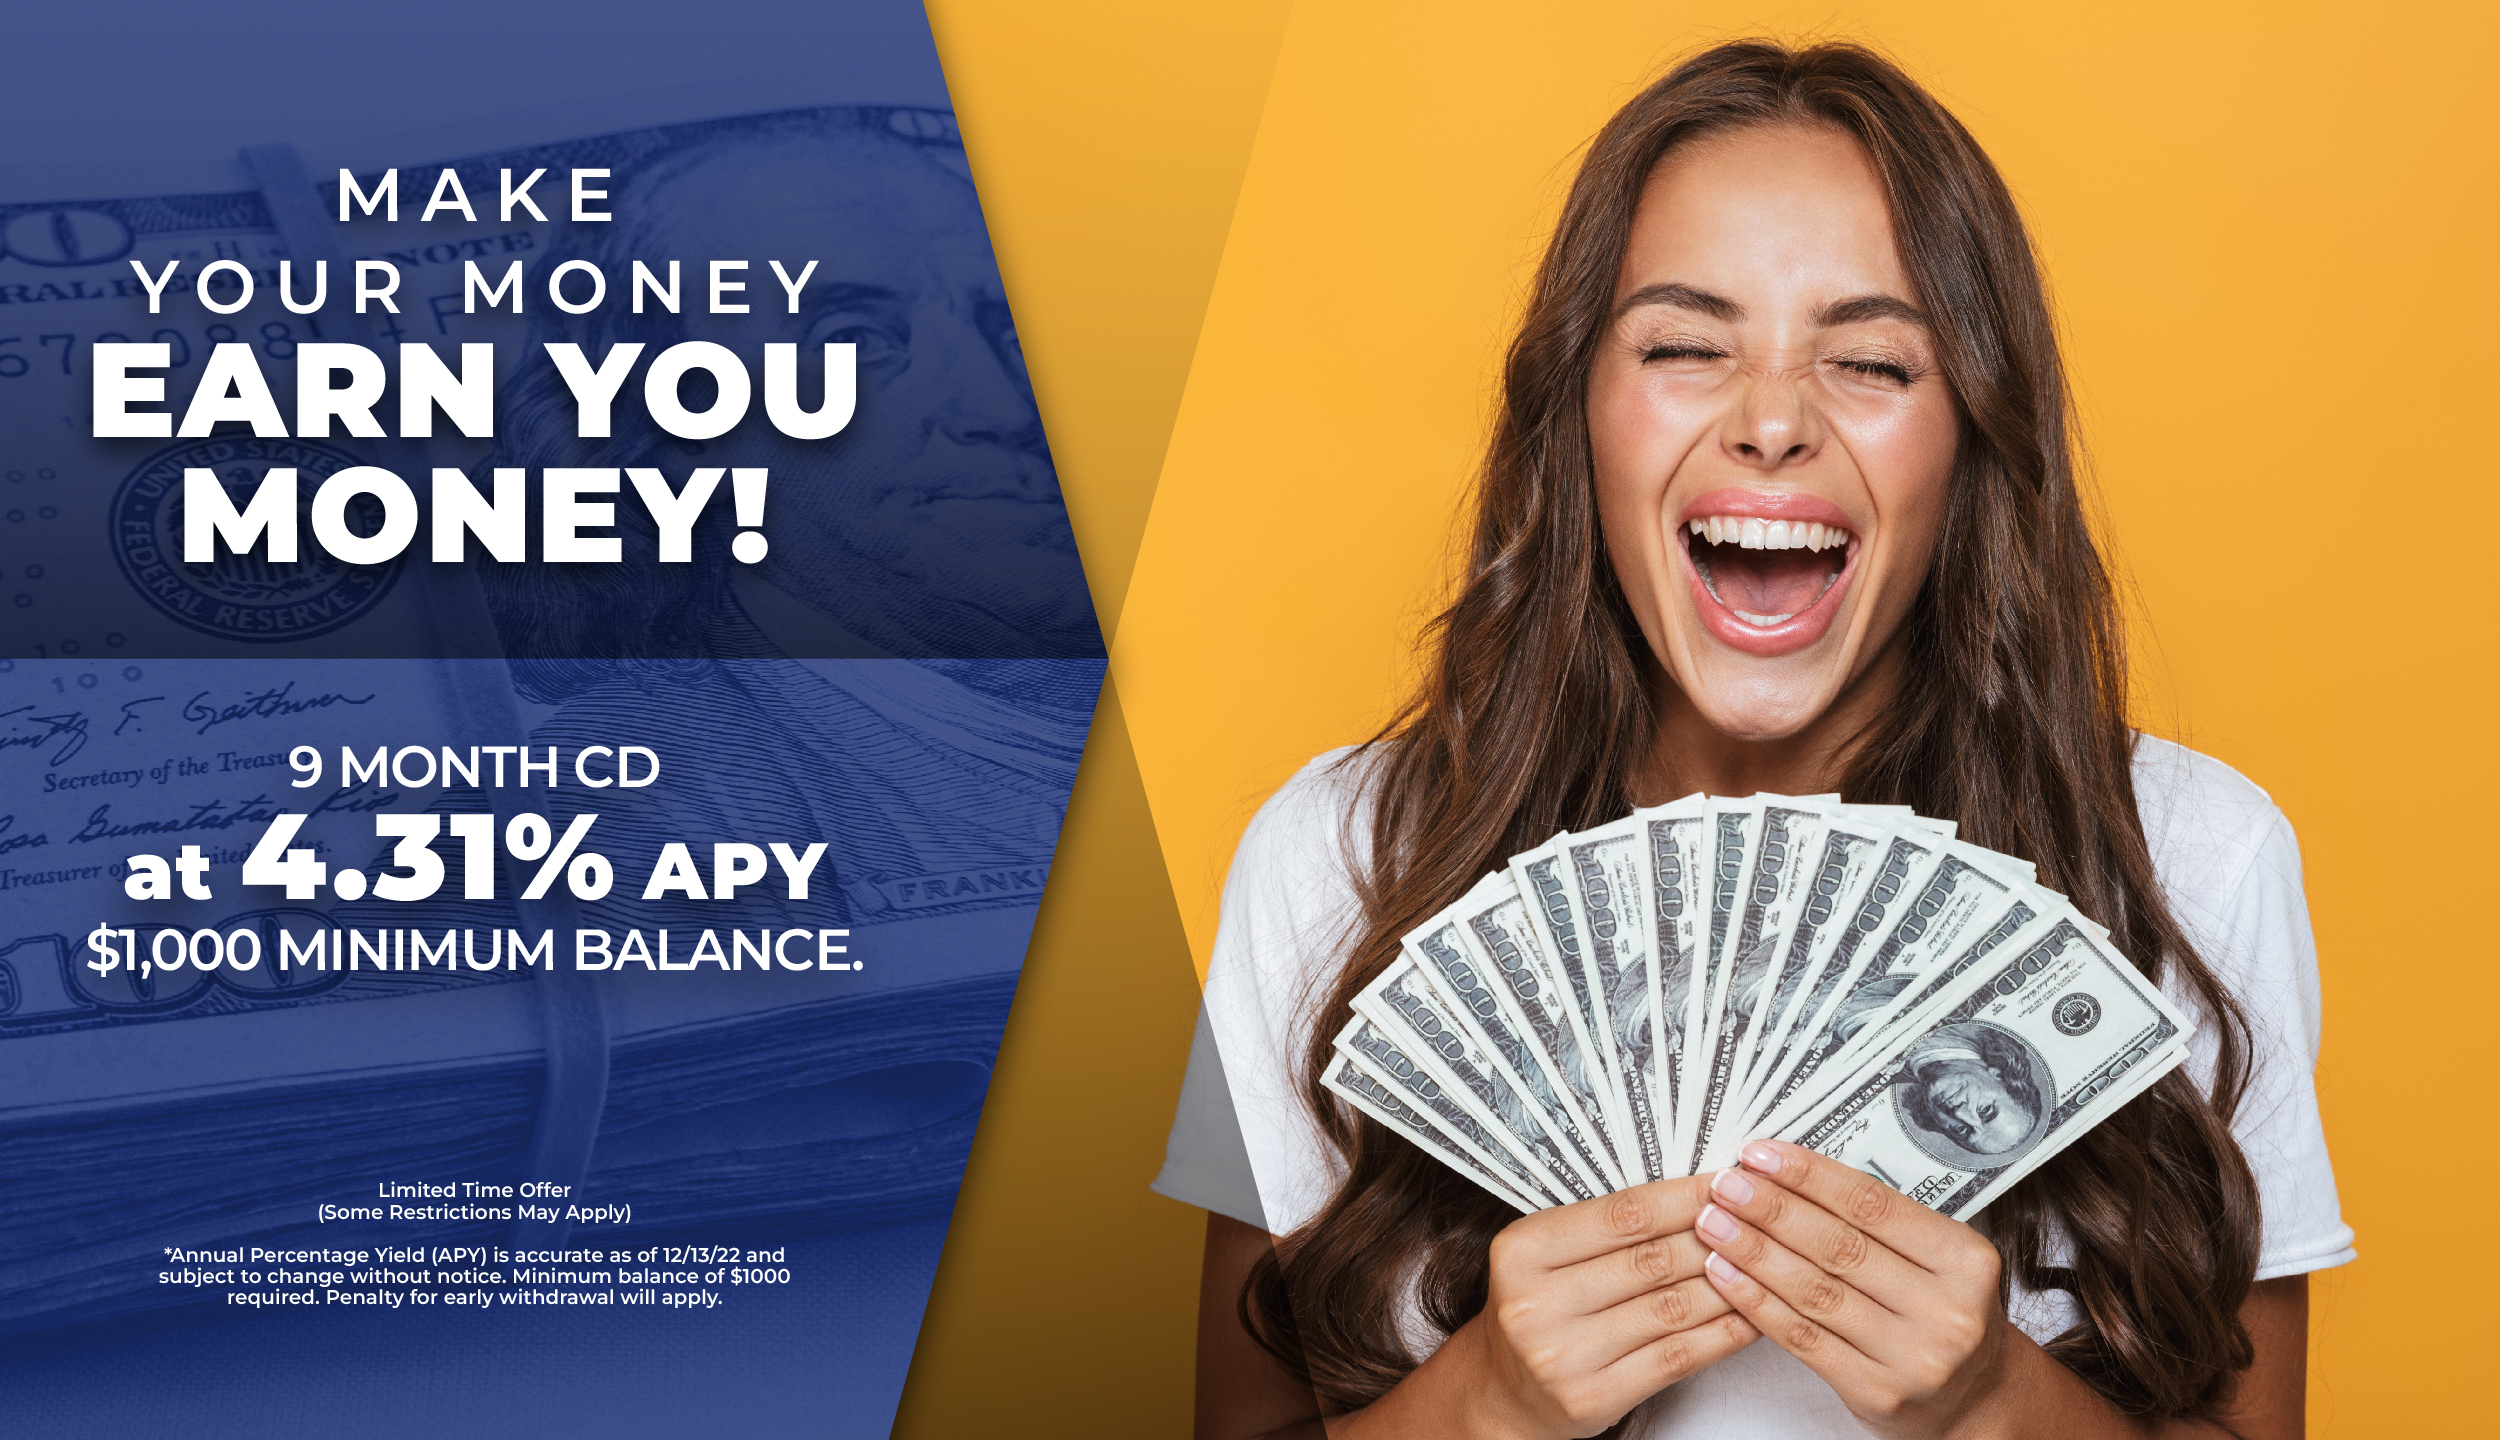 Make your money EARN you money! 9 month CD at 4.32% APY, one-thousand dollar minumum balance.